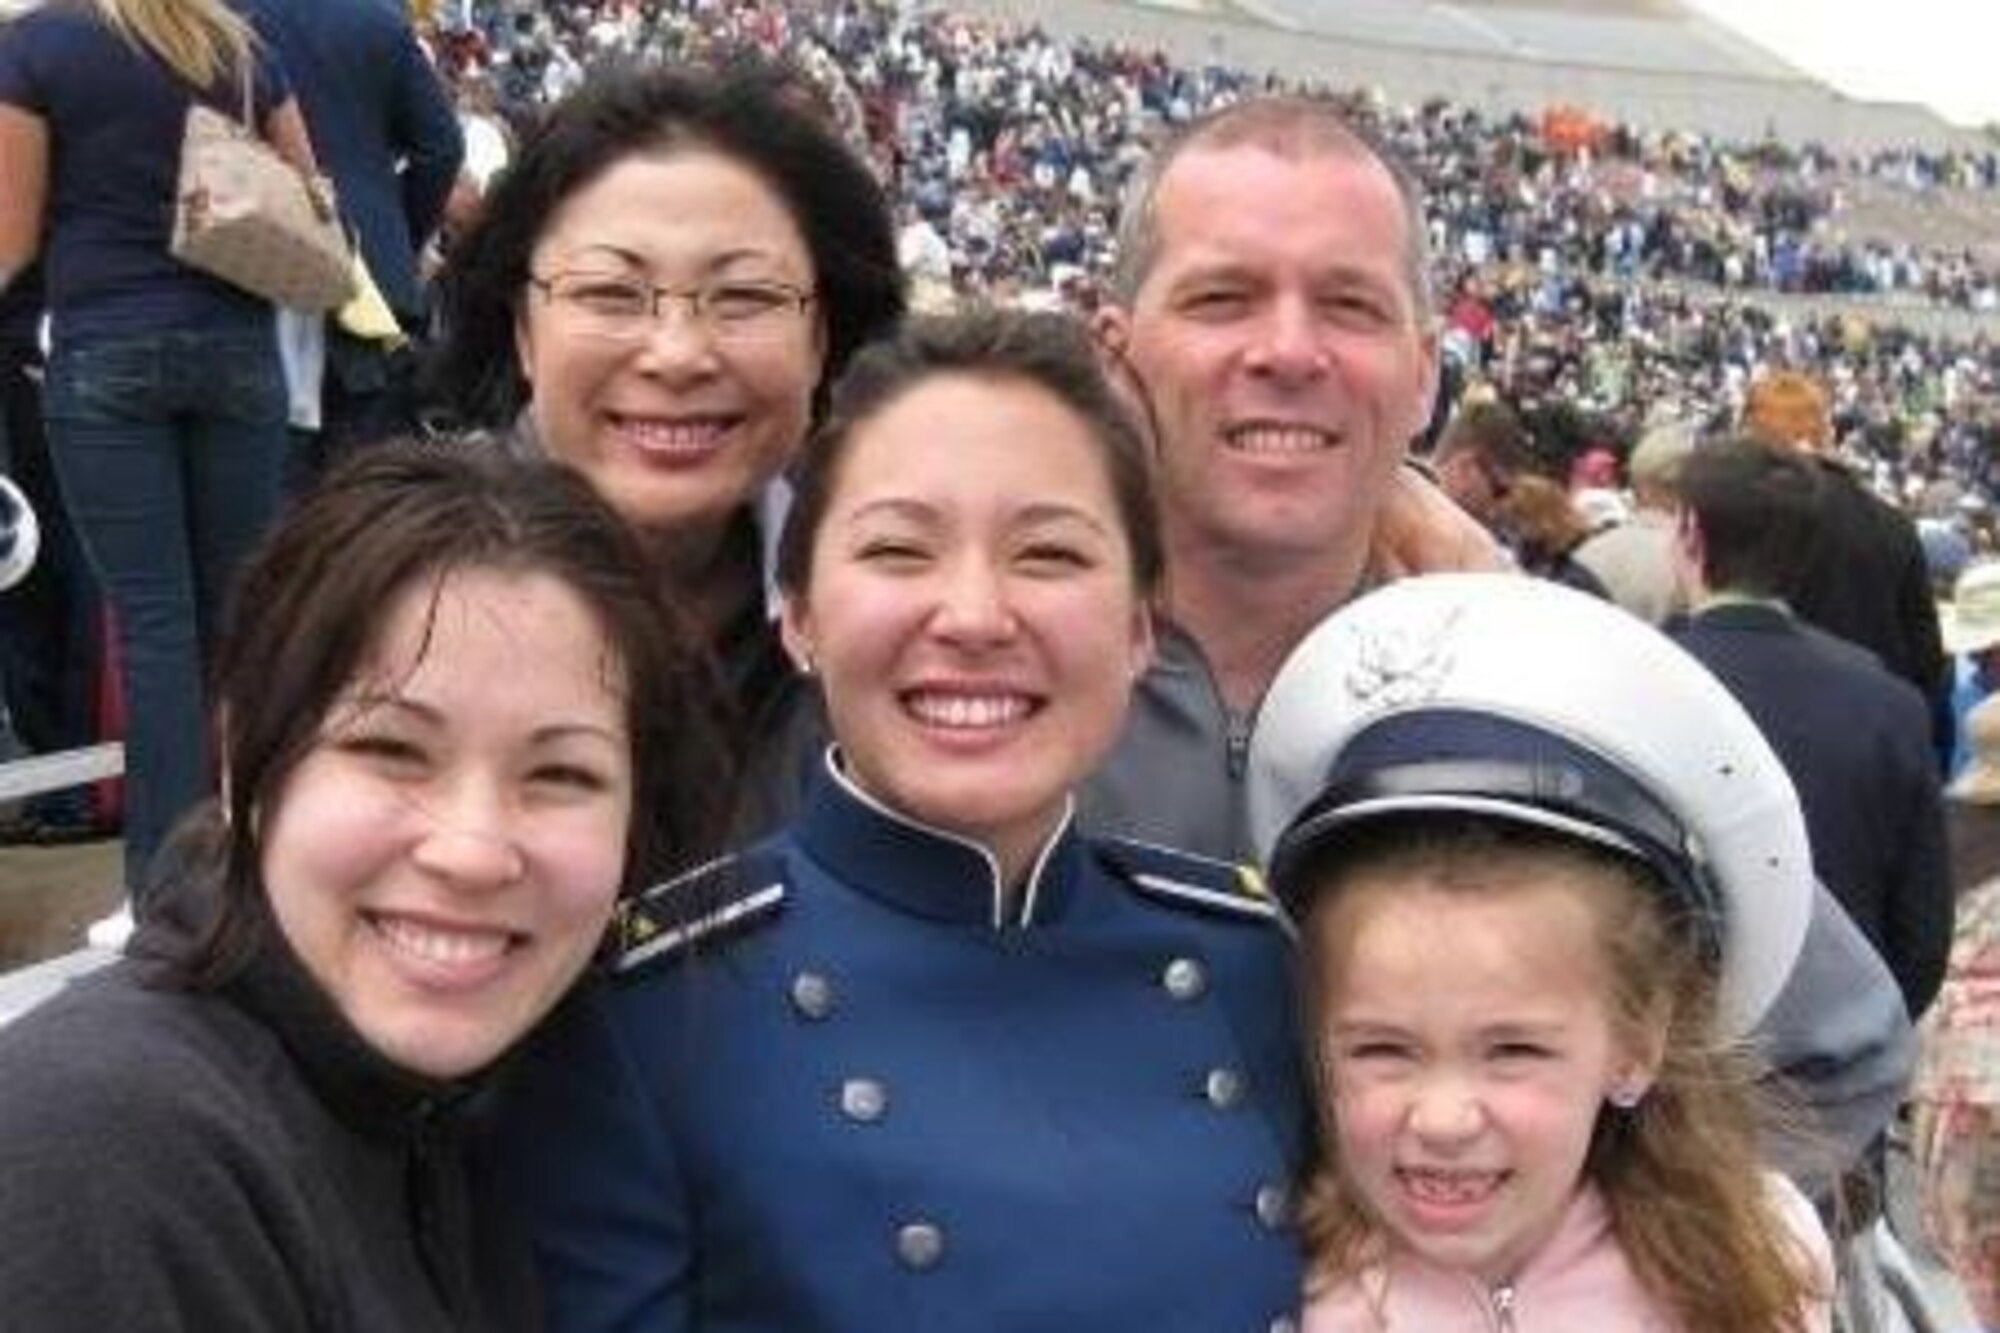 Capt. Deborah A. Gaddis, 509th Weapons Squadron training flight commander and Weapons Instructor Course  instructor, celebrates with her family during her graduation from the United States Air Force Academy in May 2008, at the Falcon Stadium in Colorado Springs, Colorado. Although the Air Force wasn’t Gaddis’ original plan, the camaraderie, academics and scholarships offered by the USAFA were too good to pass up. (Courtesy Photo)